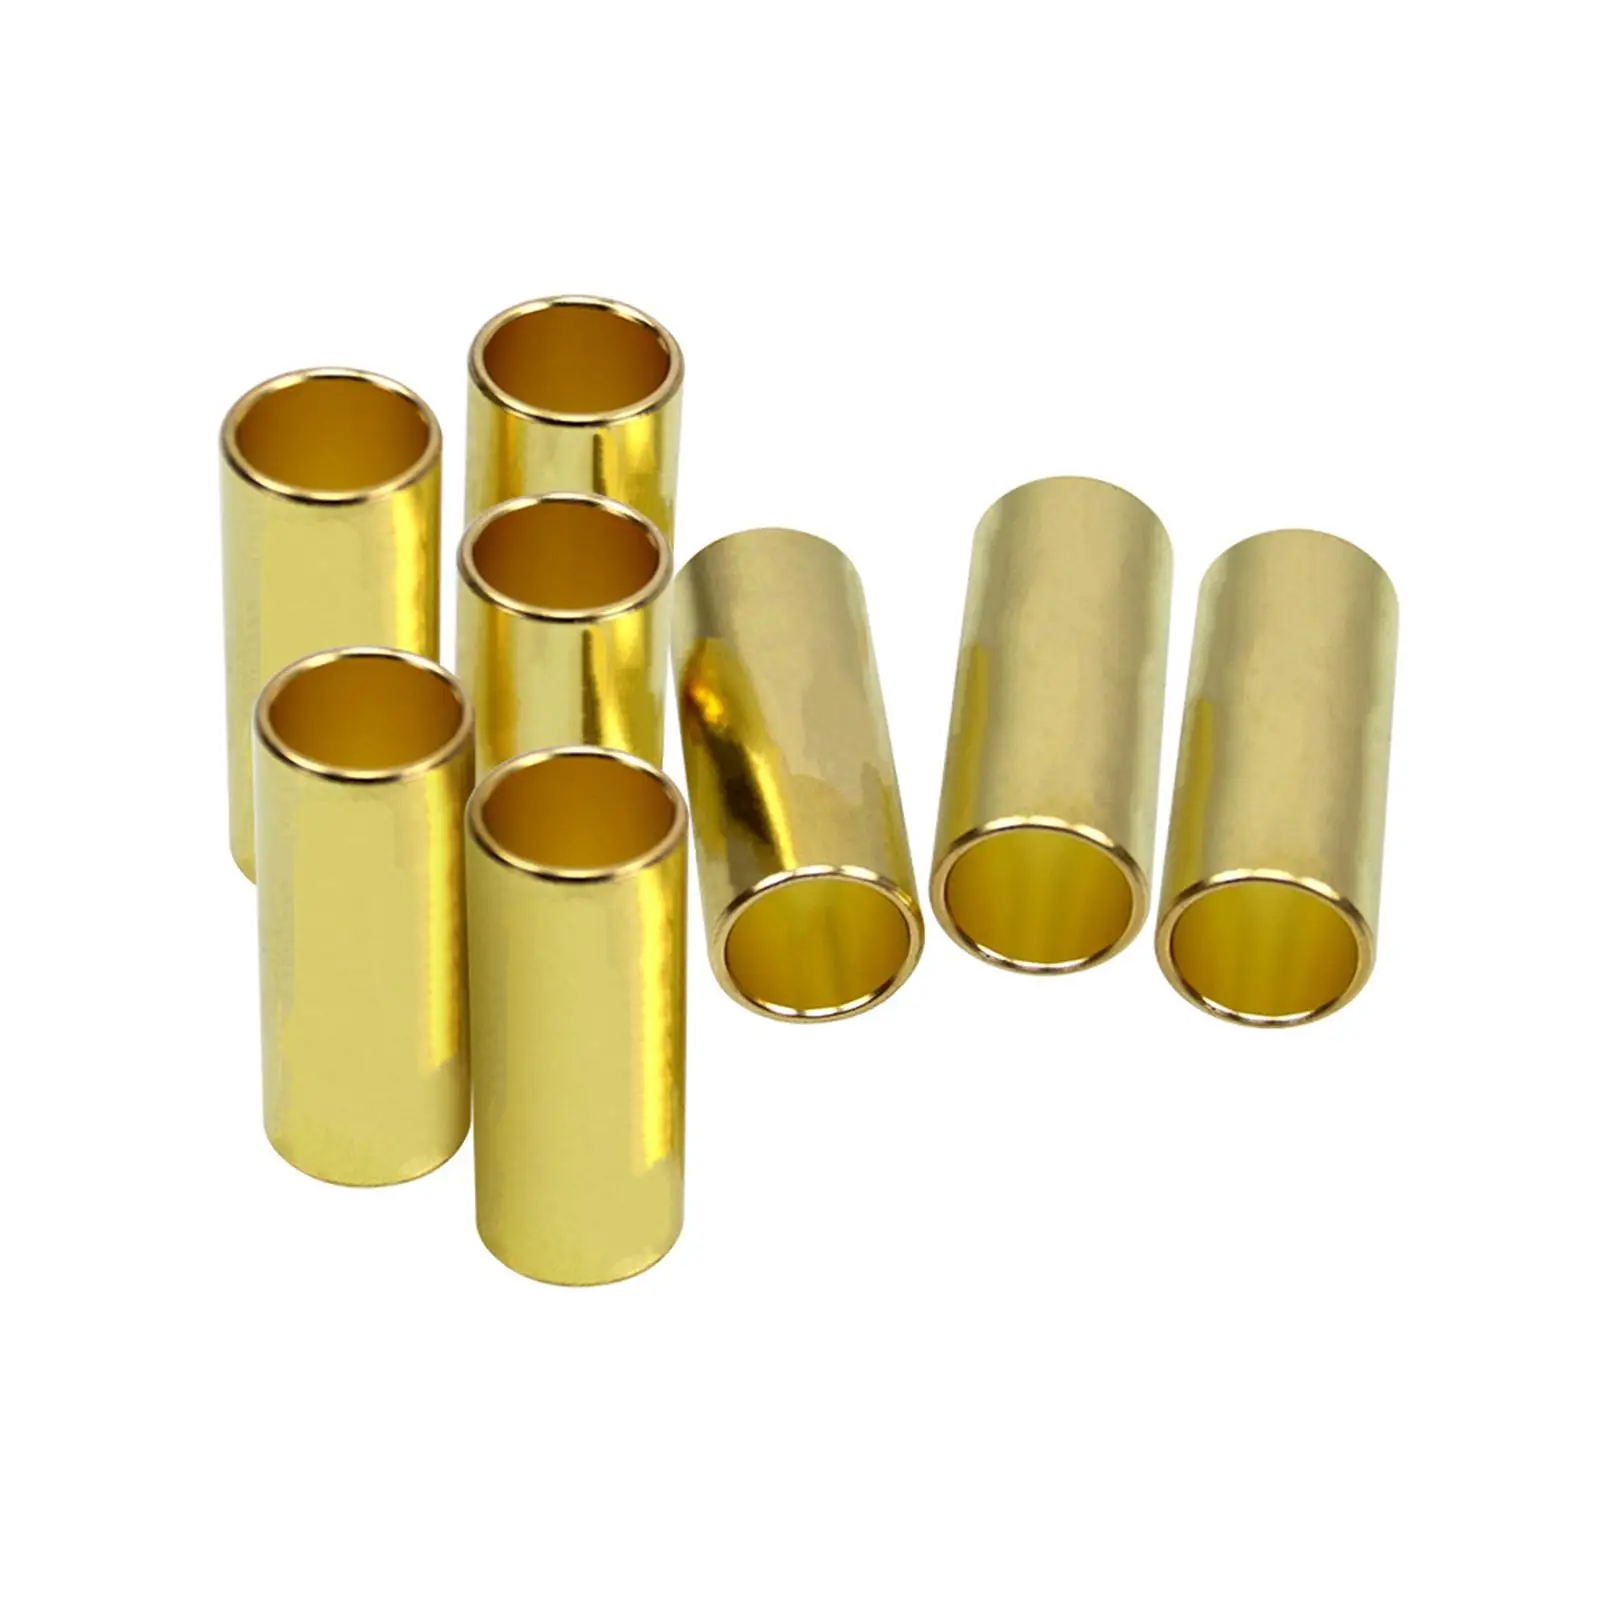 

4Pcs Bronze Leaf Spring Shackle Bushings K7129100 Easy to Install Strong Direct Replaces High Performance for Dexter Axle